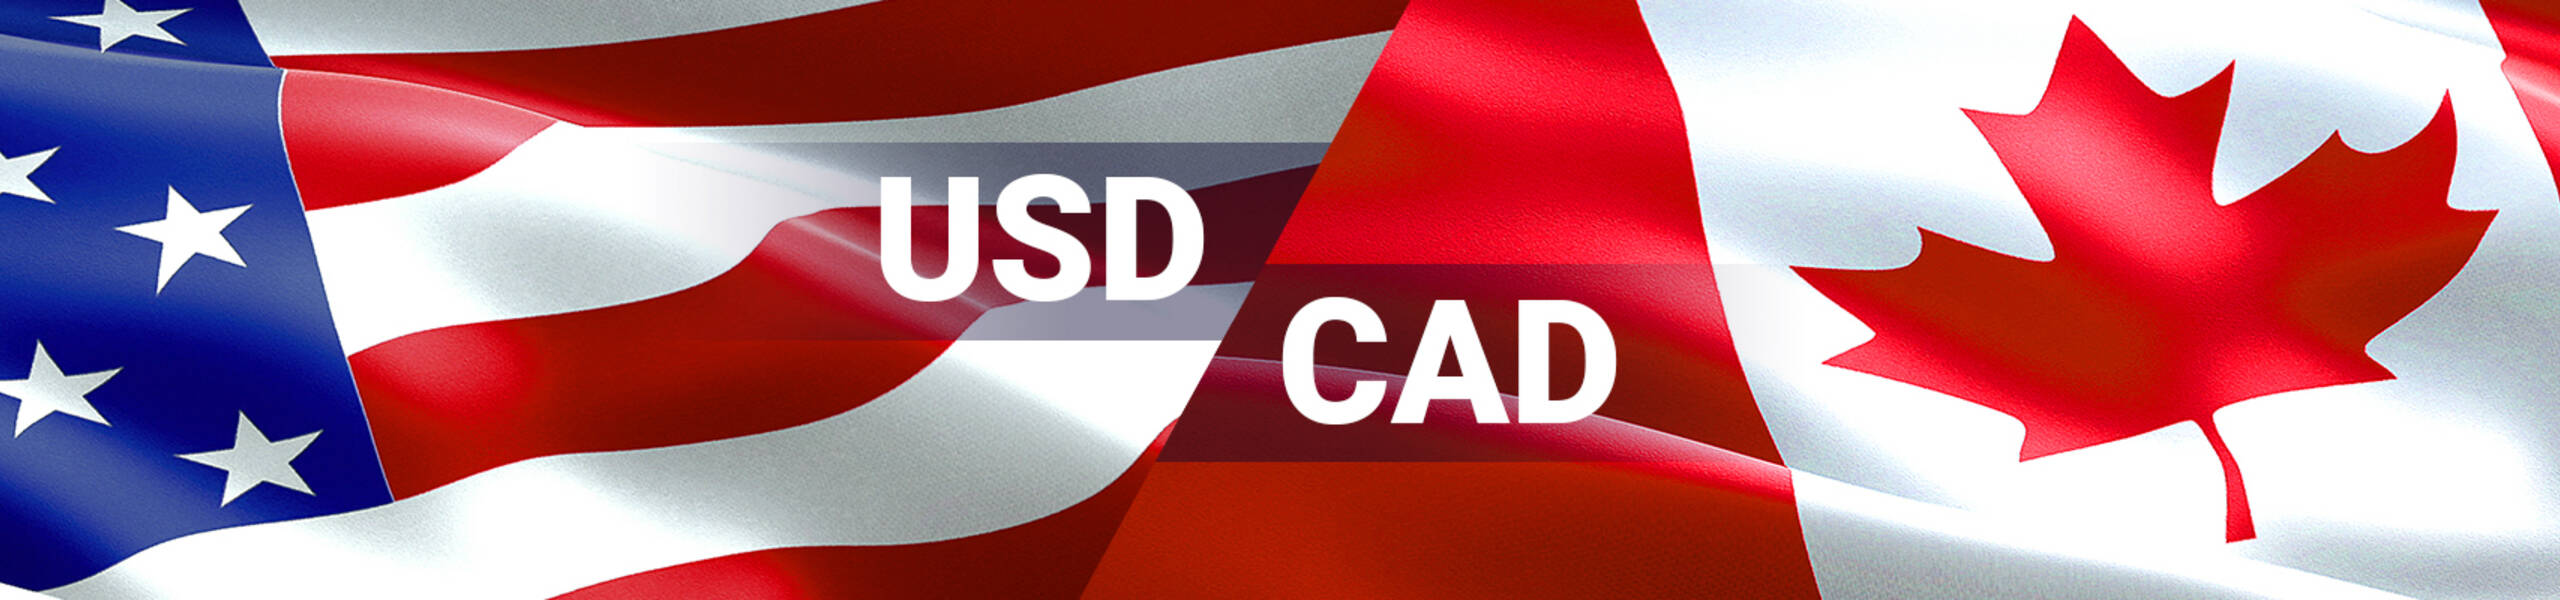 USD/CAD reached sell target 1.2600